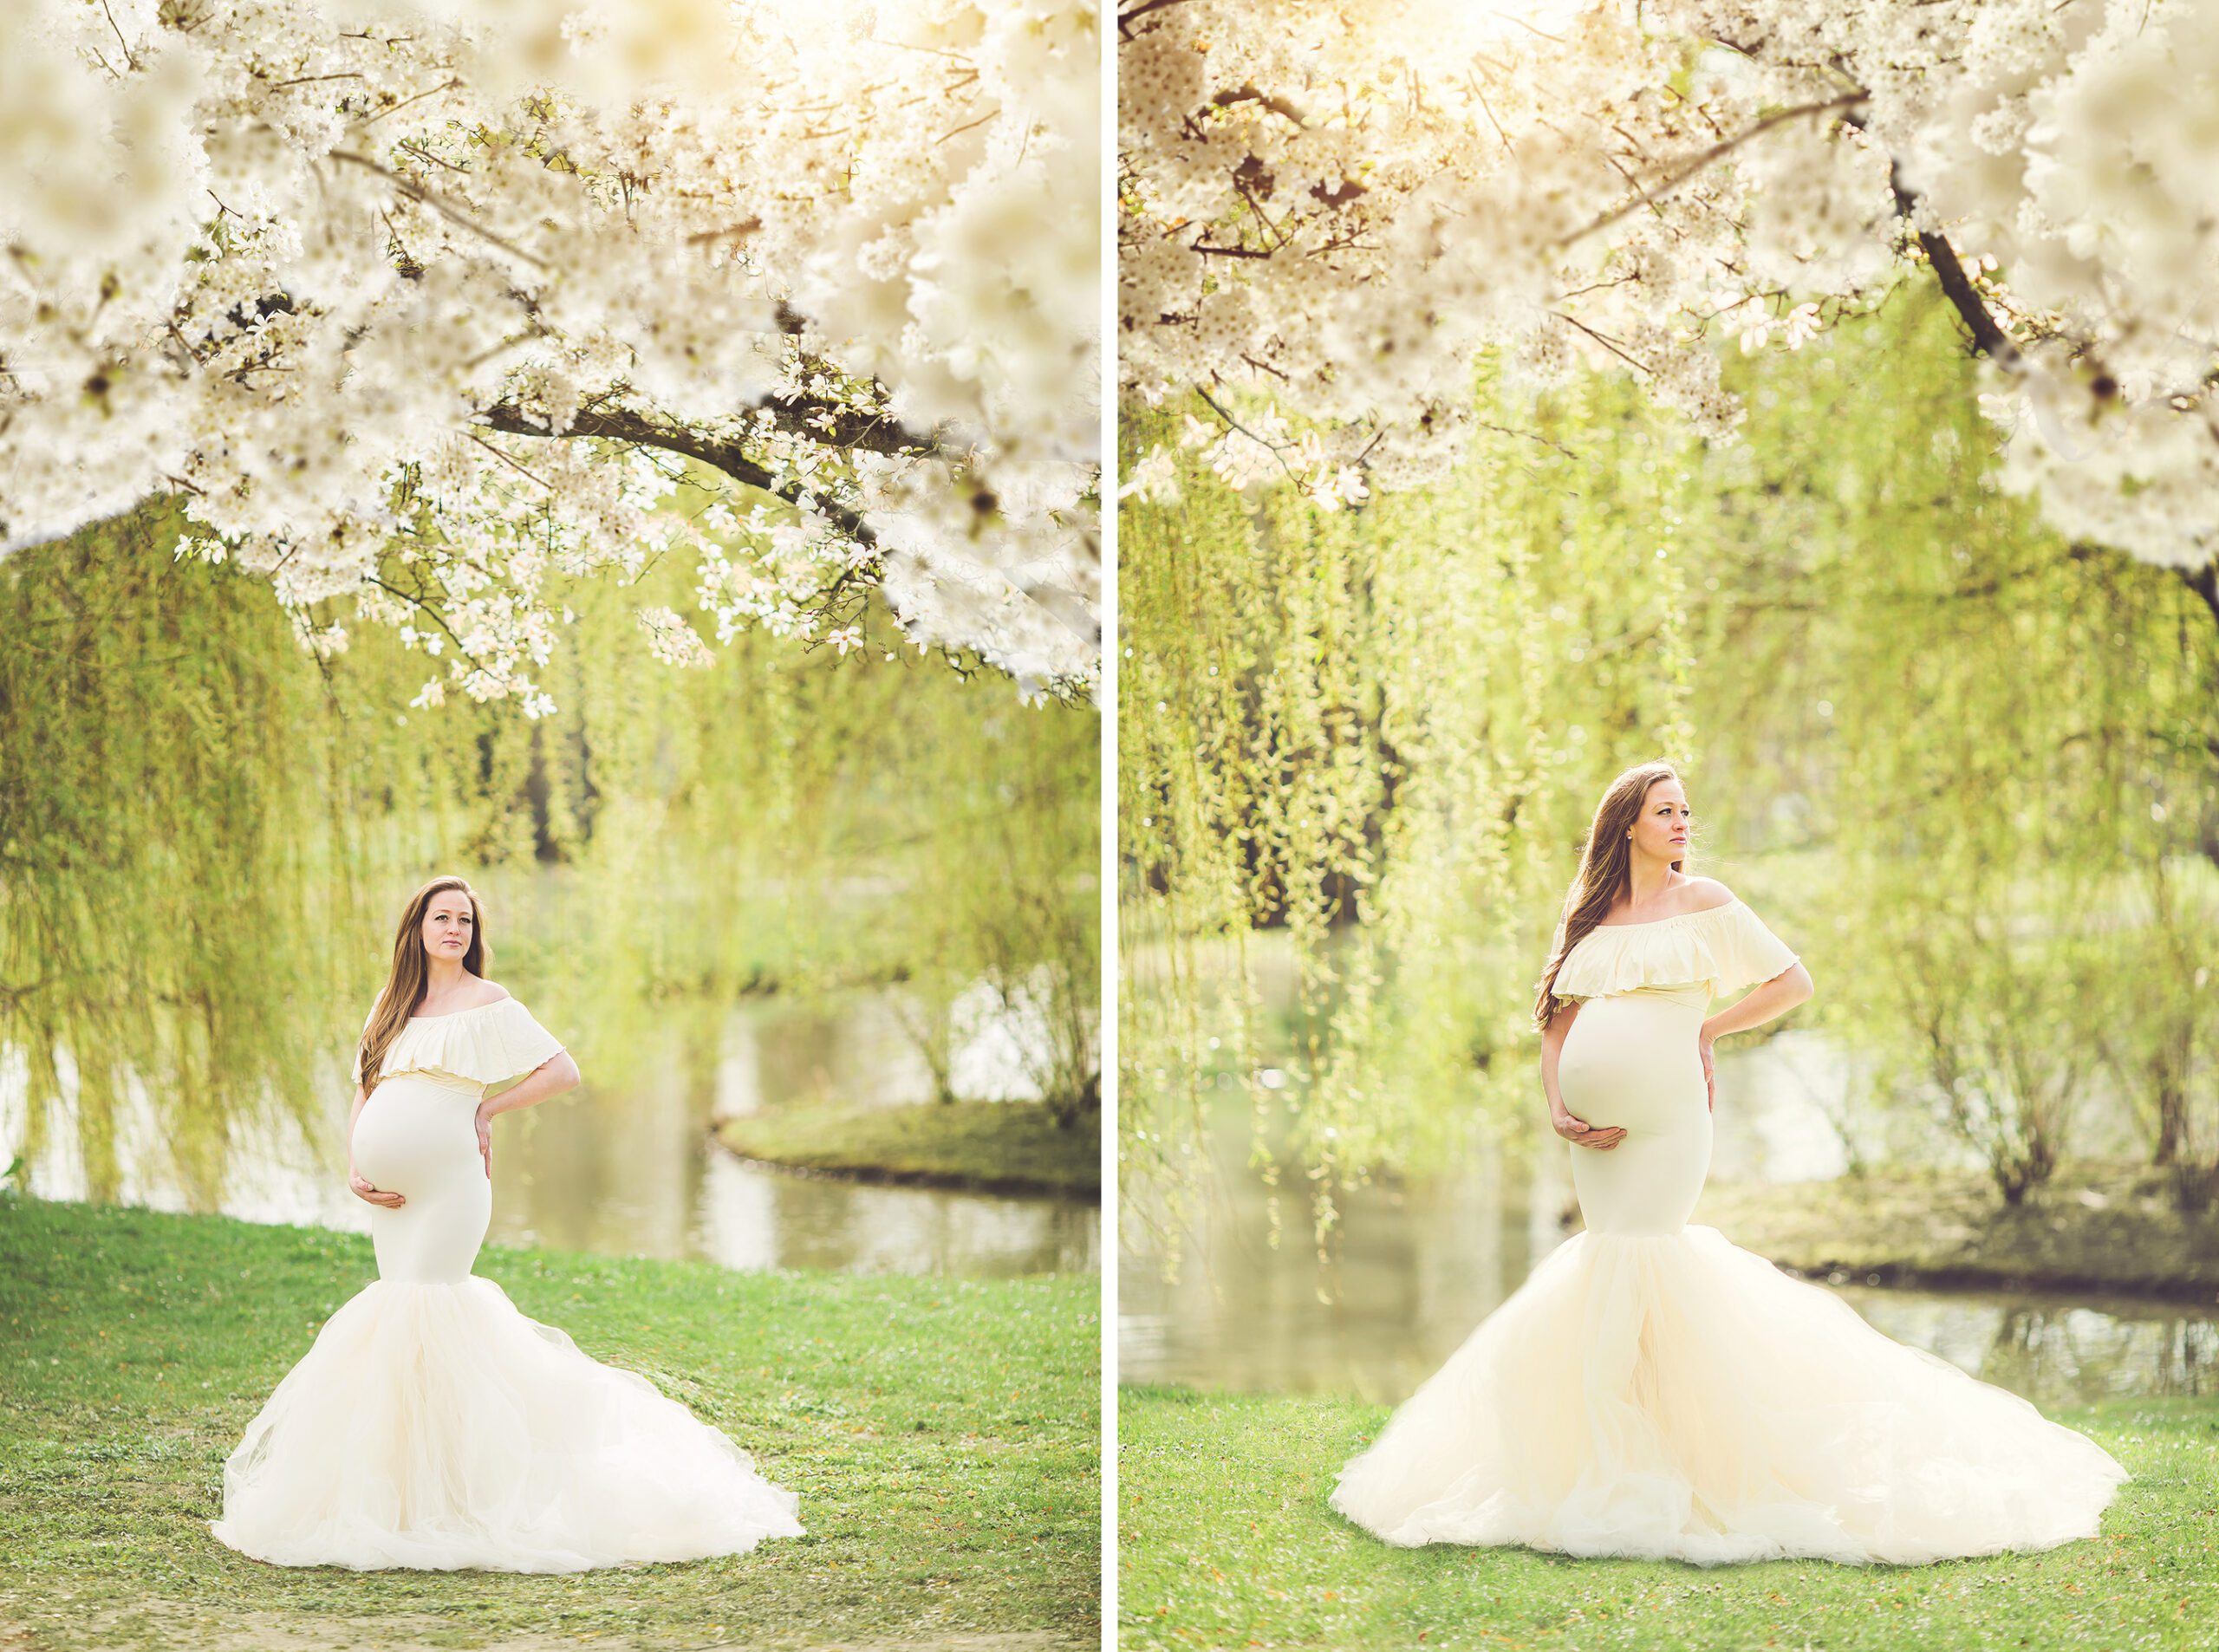 Creams and spring greens are in abundance during this spring maternity session by Wiesbaden maternity photographer